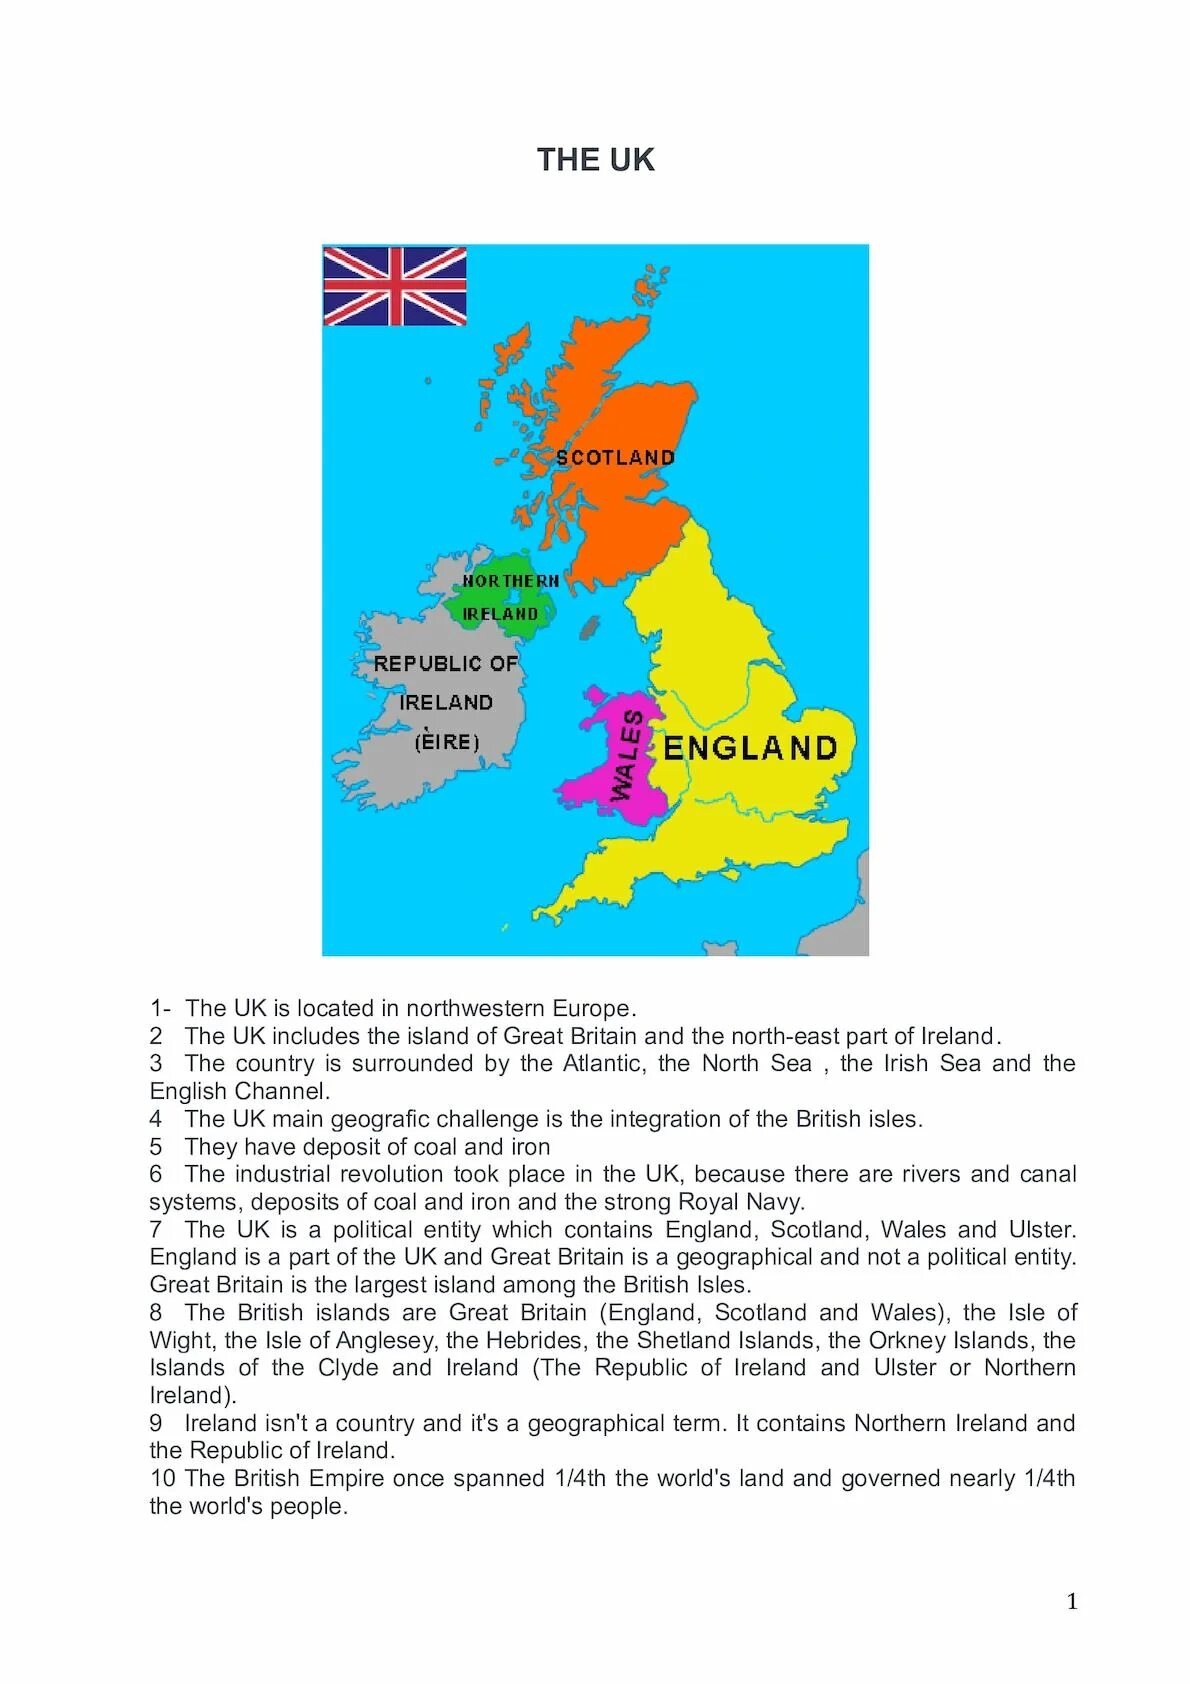 The United Kingdom of great Britain and Northern Ireland карта. Карта the uk of great Britain and Northern Ireland. Карта United Kingdom of great Britain and Northern Ireland пустая. Проект на тему the United Kingdom of great Britain and Northern Ireland. Great britain and northern island